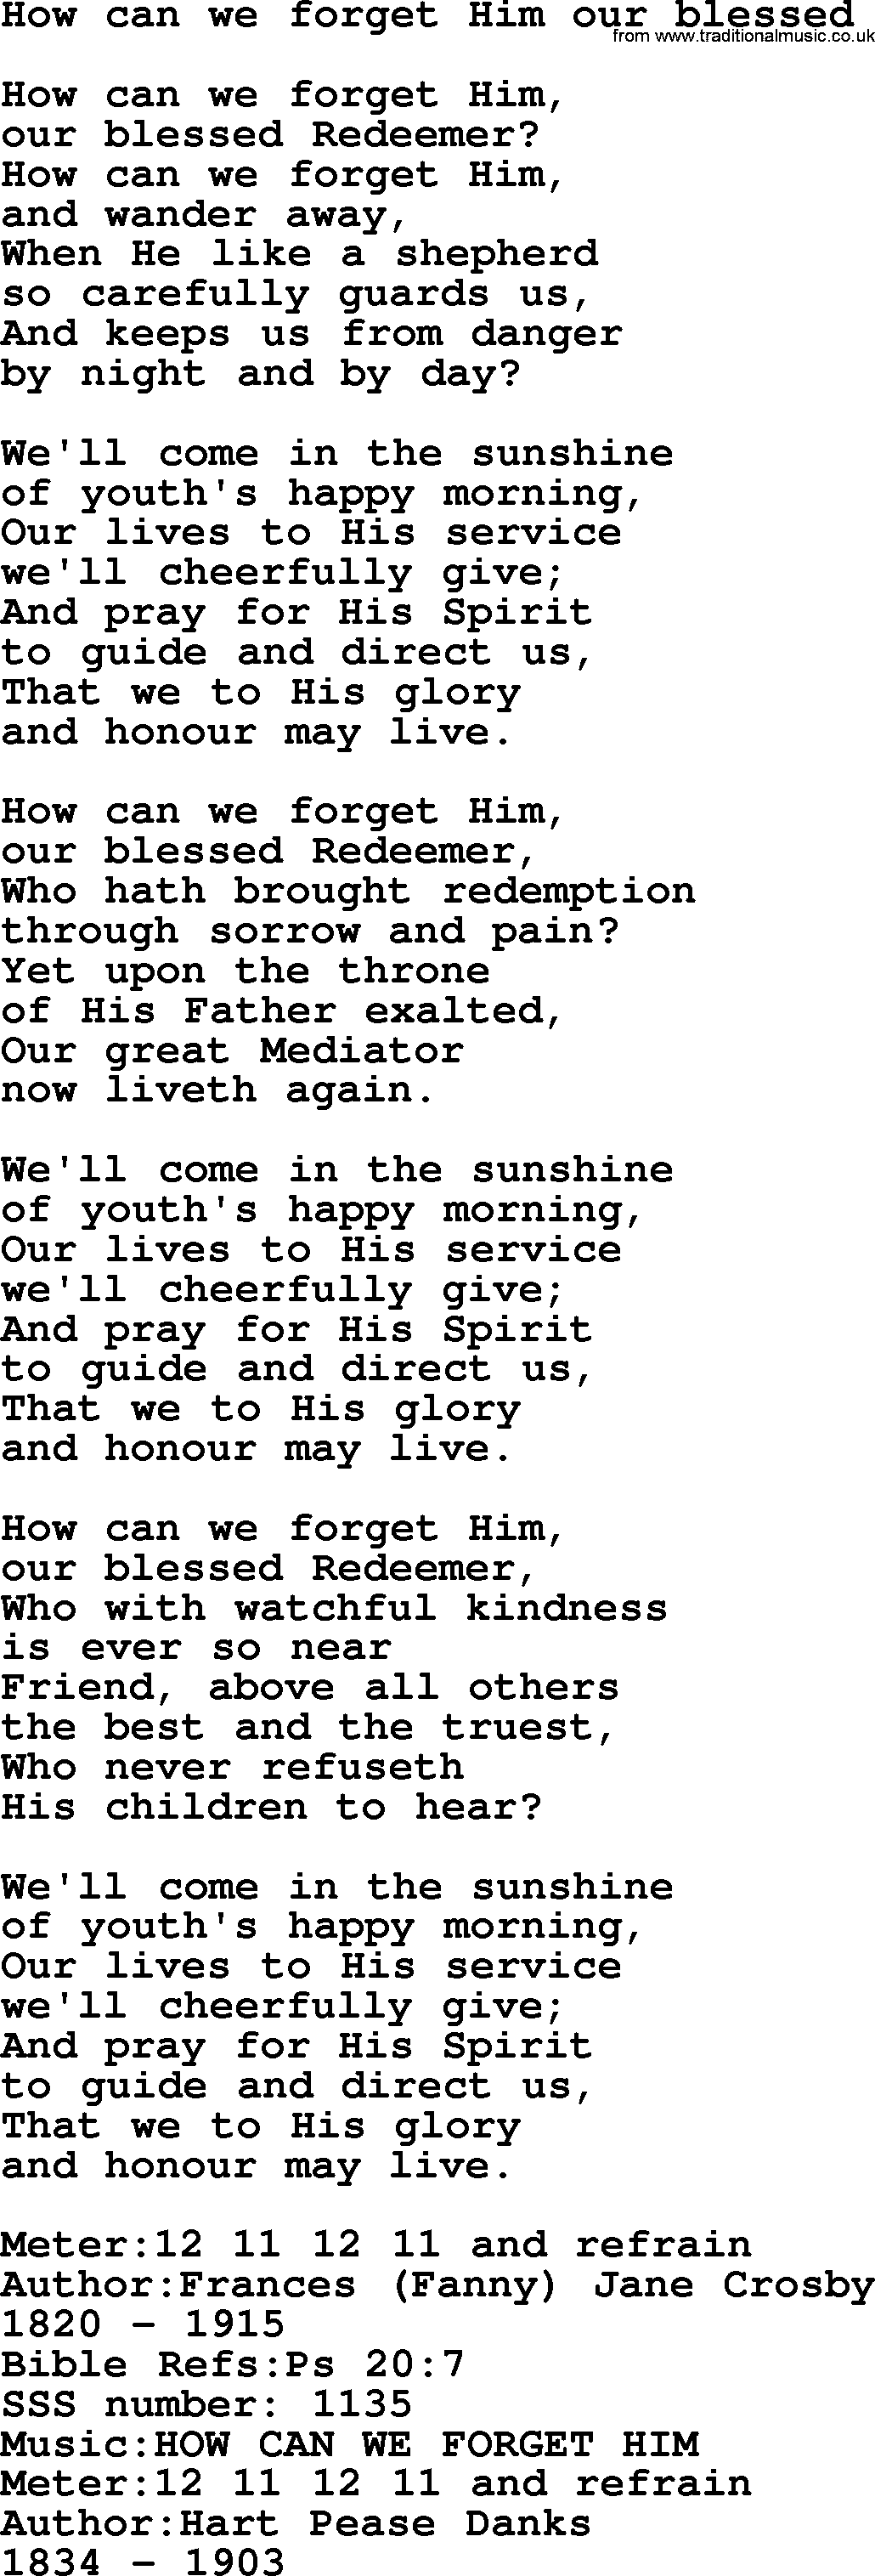 Sacred Songs and Solos complete, 1200 Hymns, title: How Can We Forget Him Our Blessed, lyrics and PDF